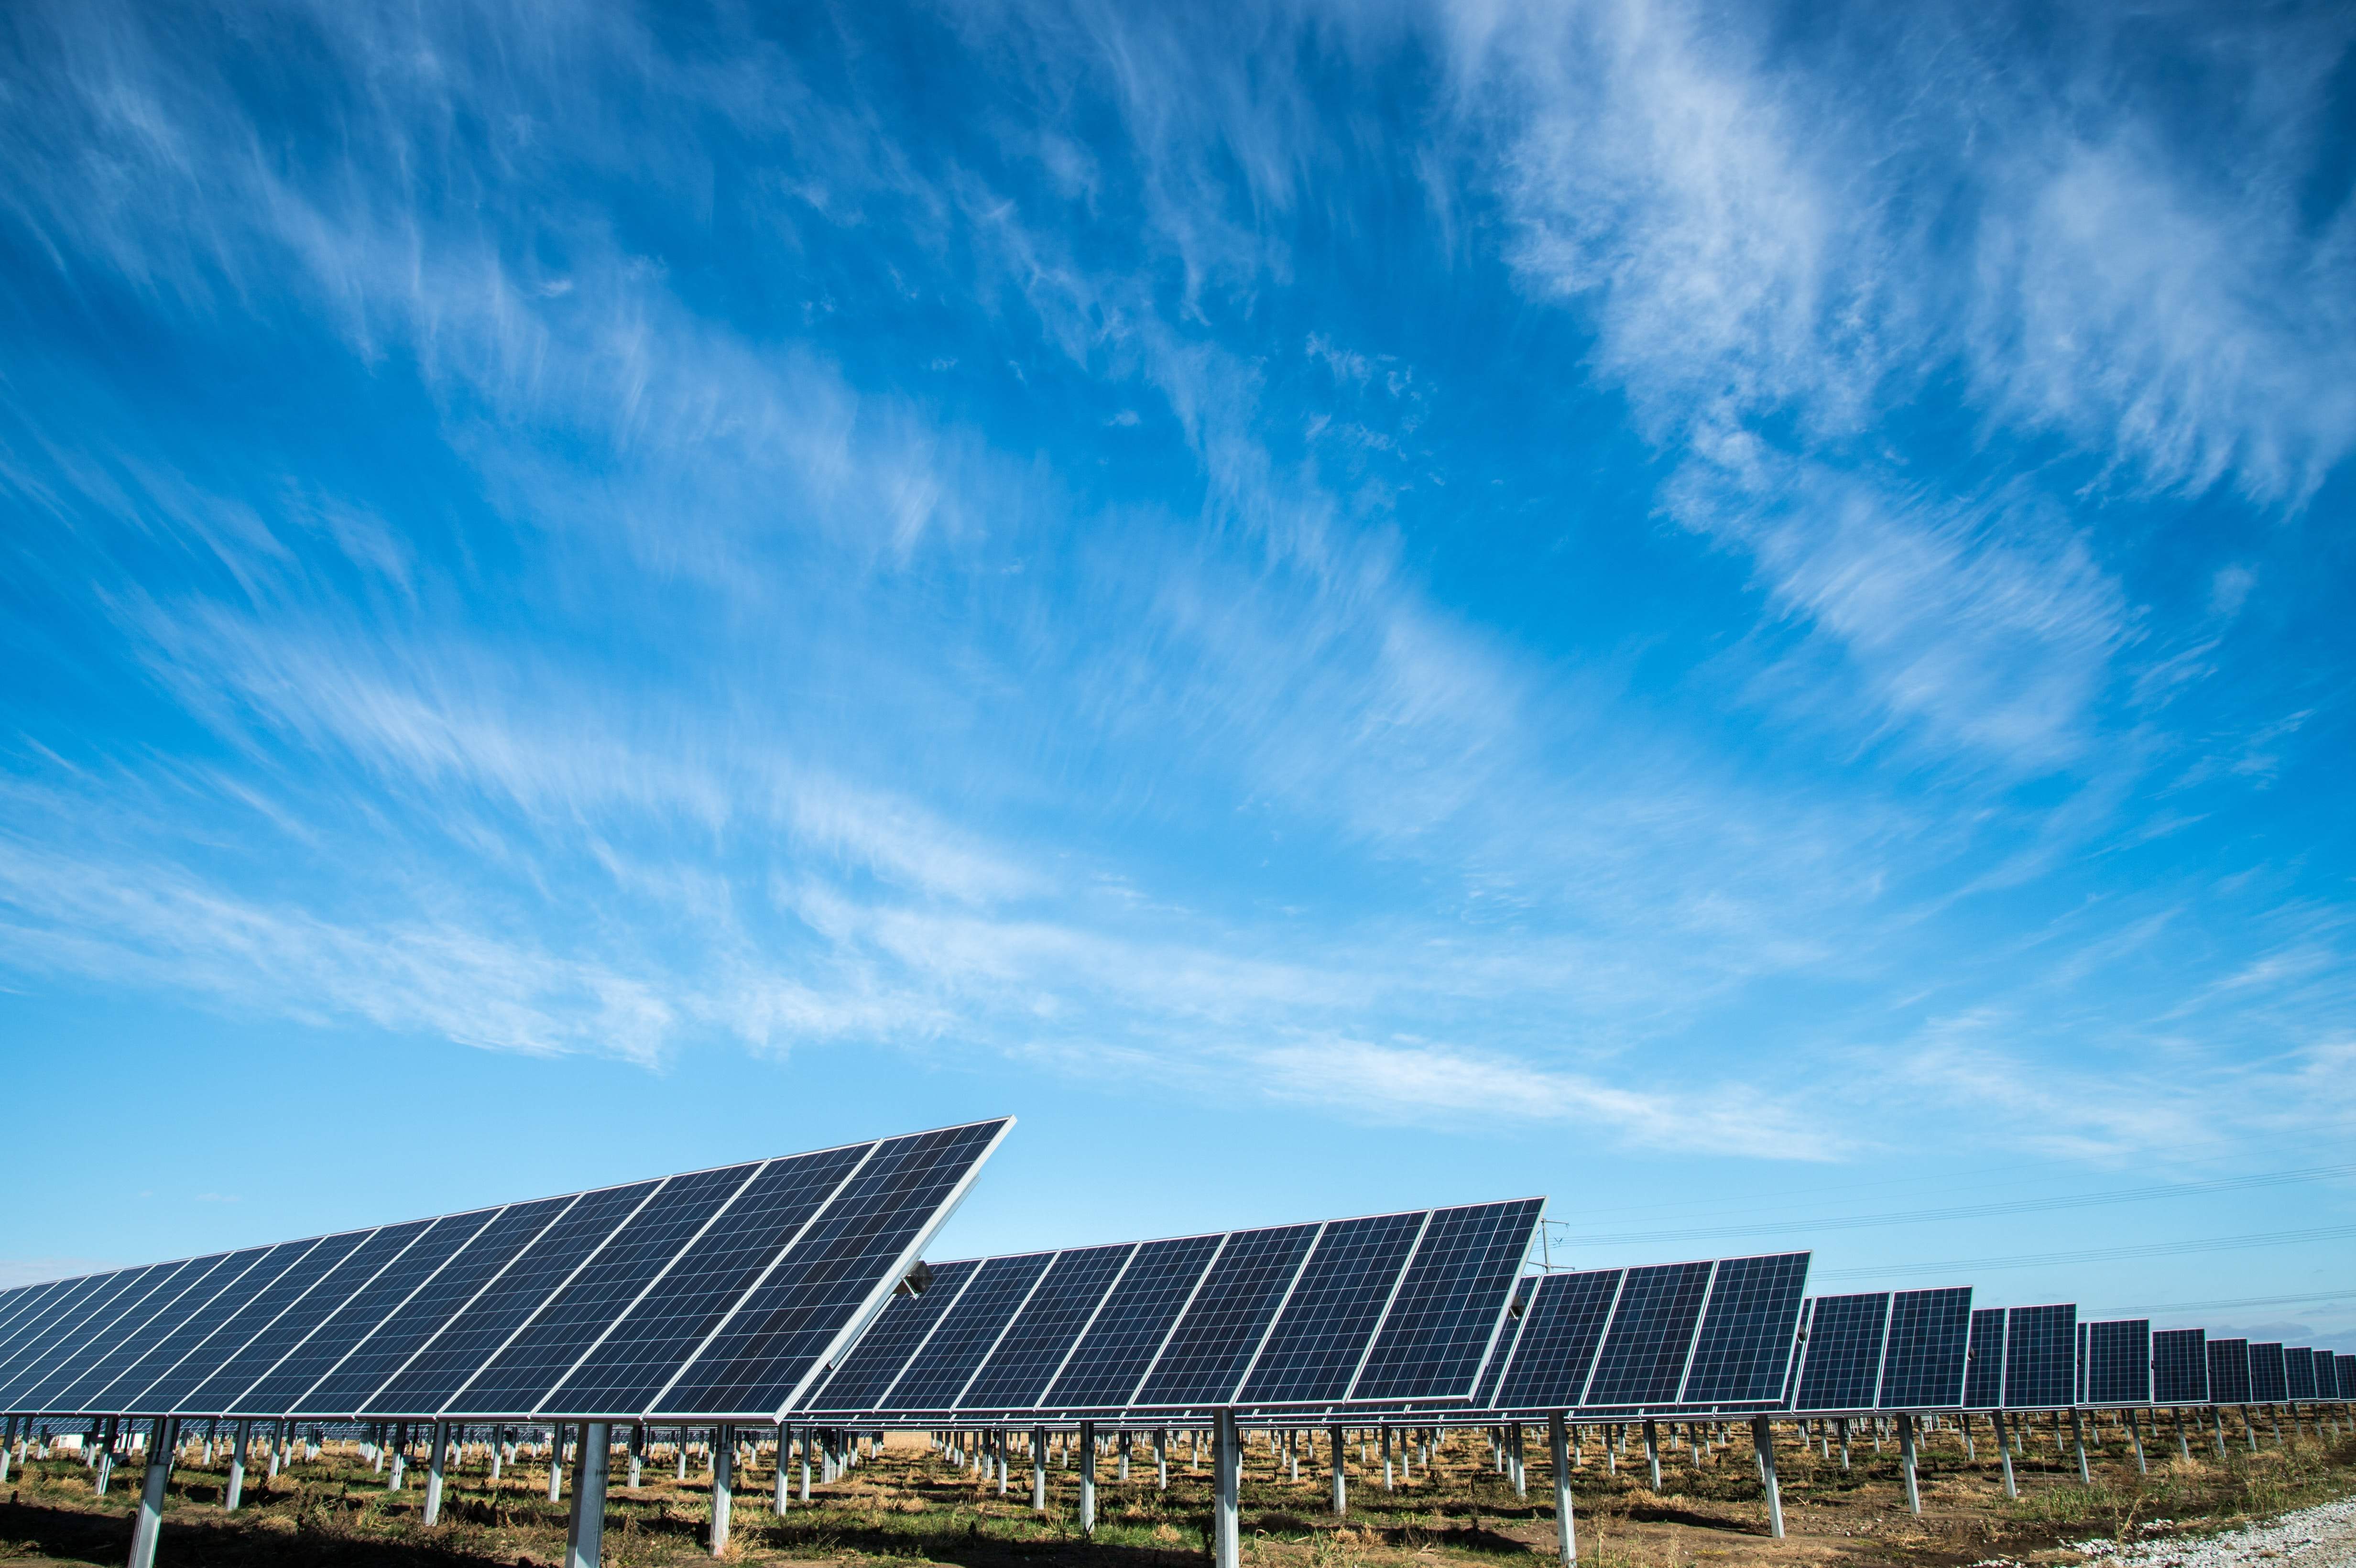 Eni, GSE plan to build 26MW solar plant in Italy